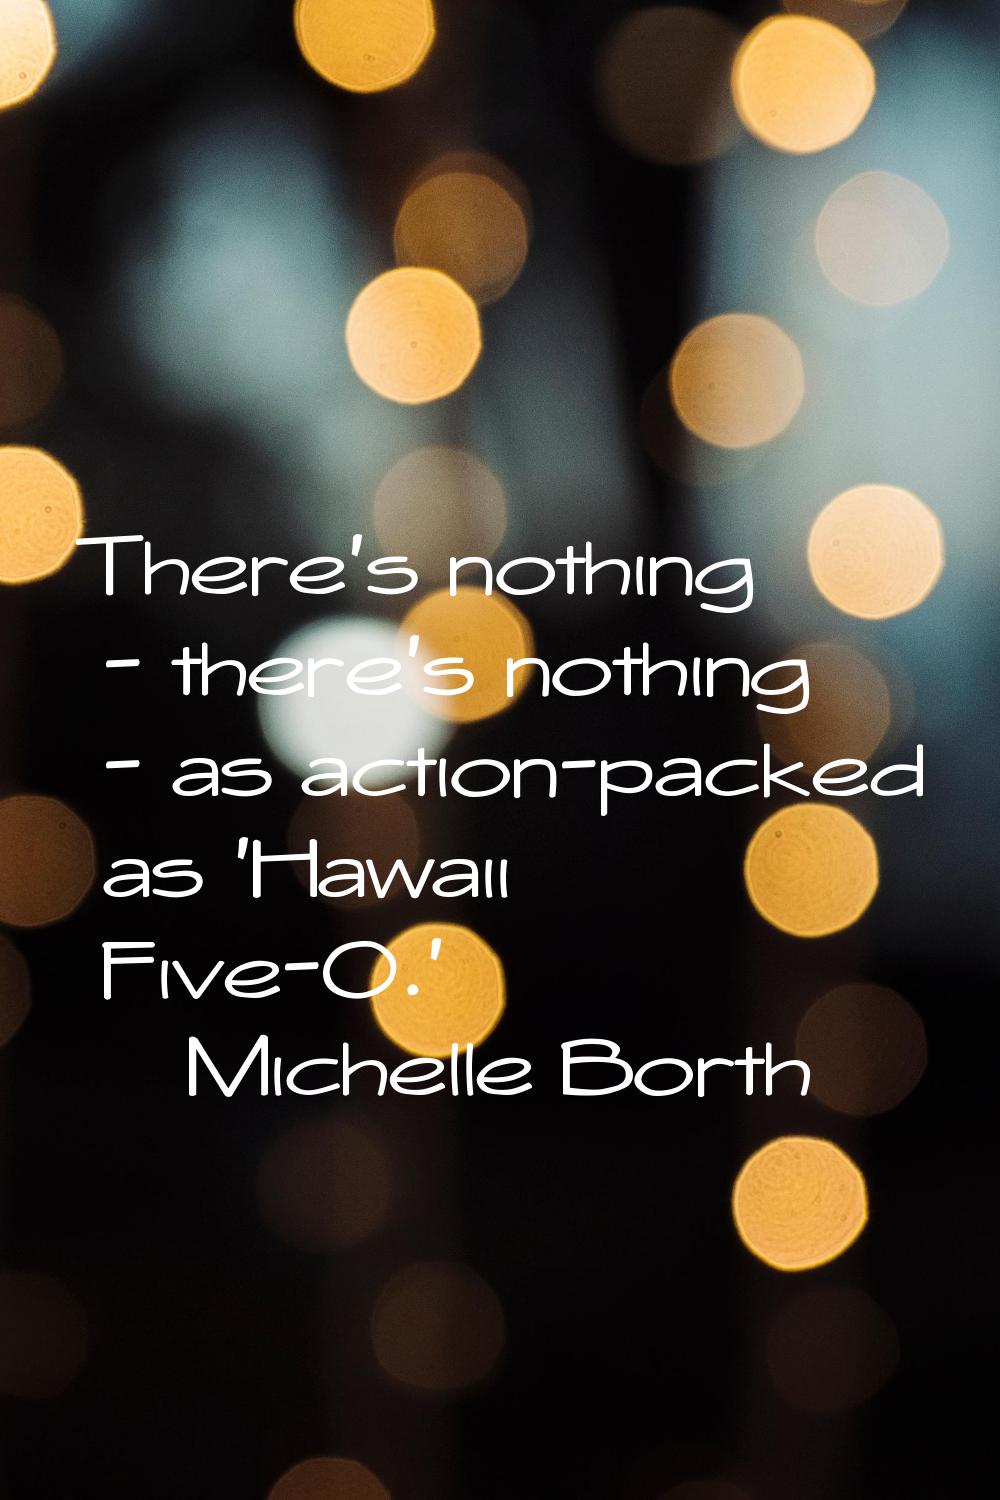 There's nothing - there's nothing - as action-packed as 'Hawaii Five-O.'